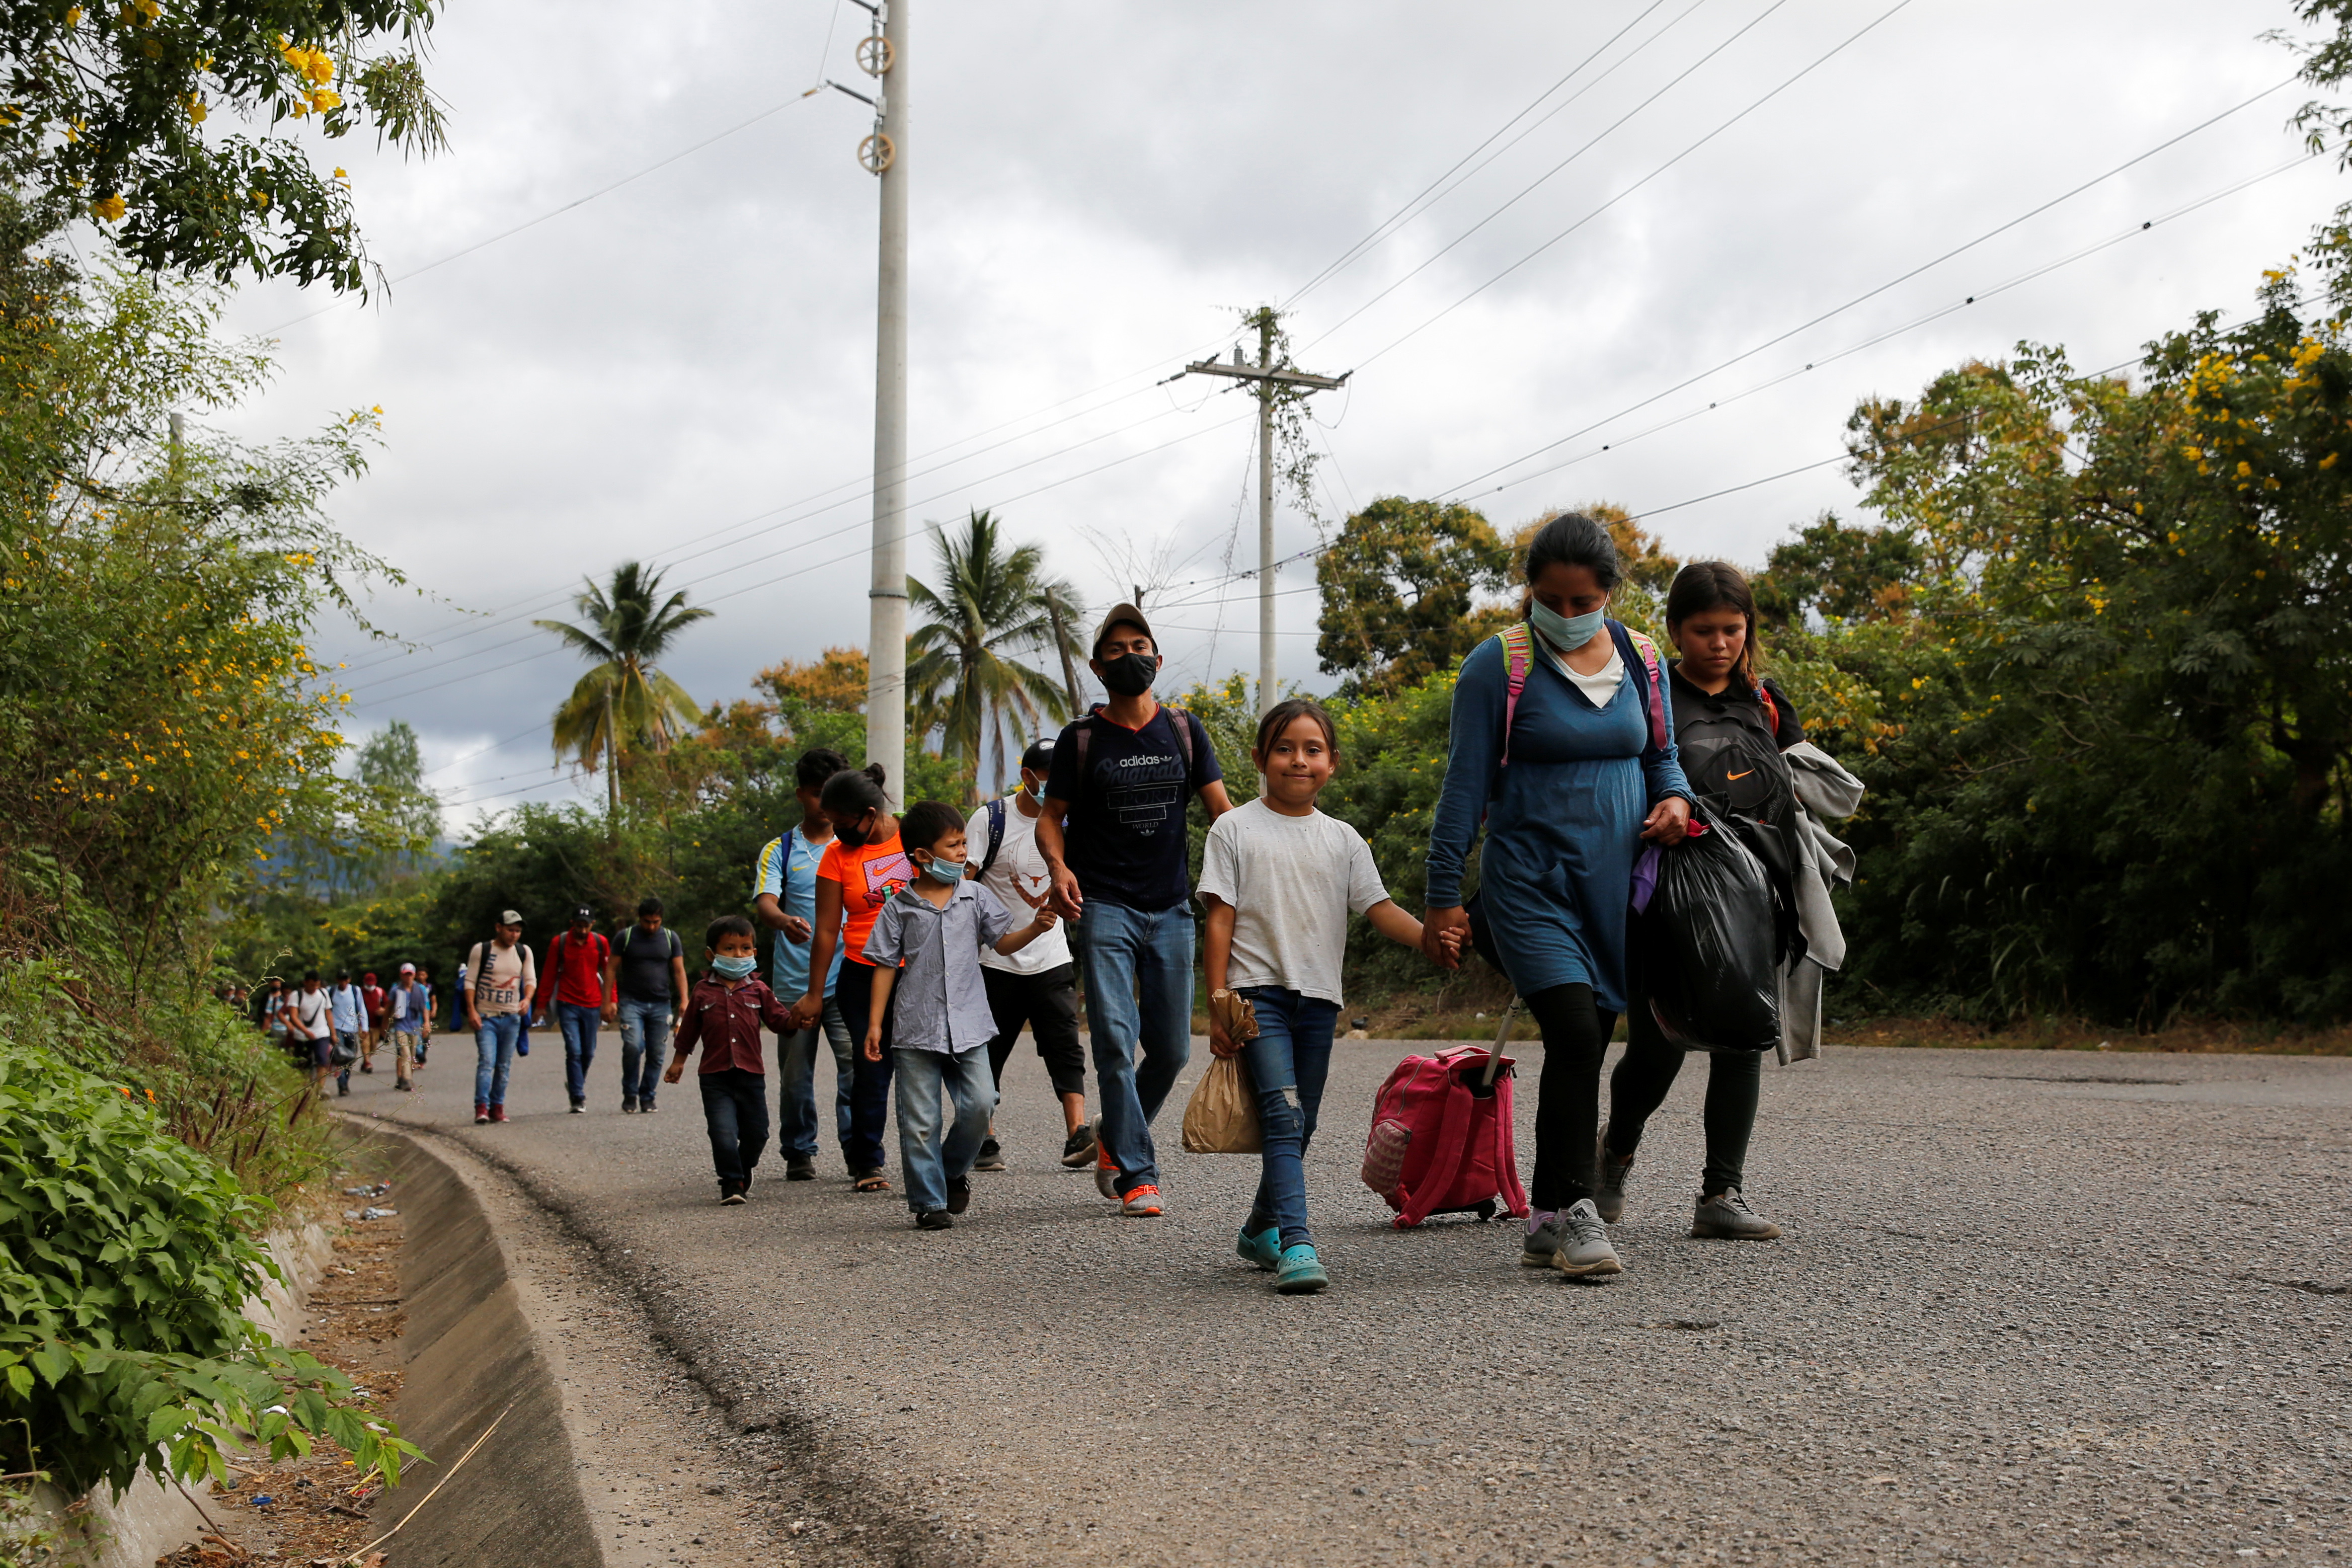 Hondurans take part in a new caravan of migrants set to head to the United States